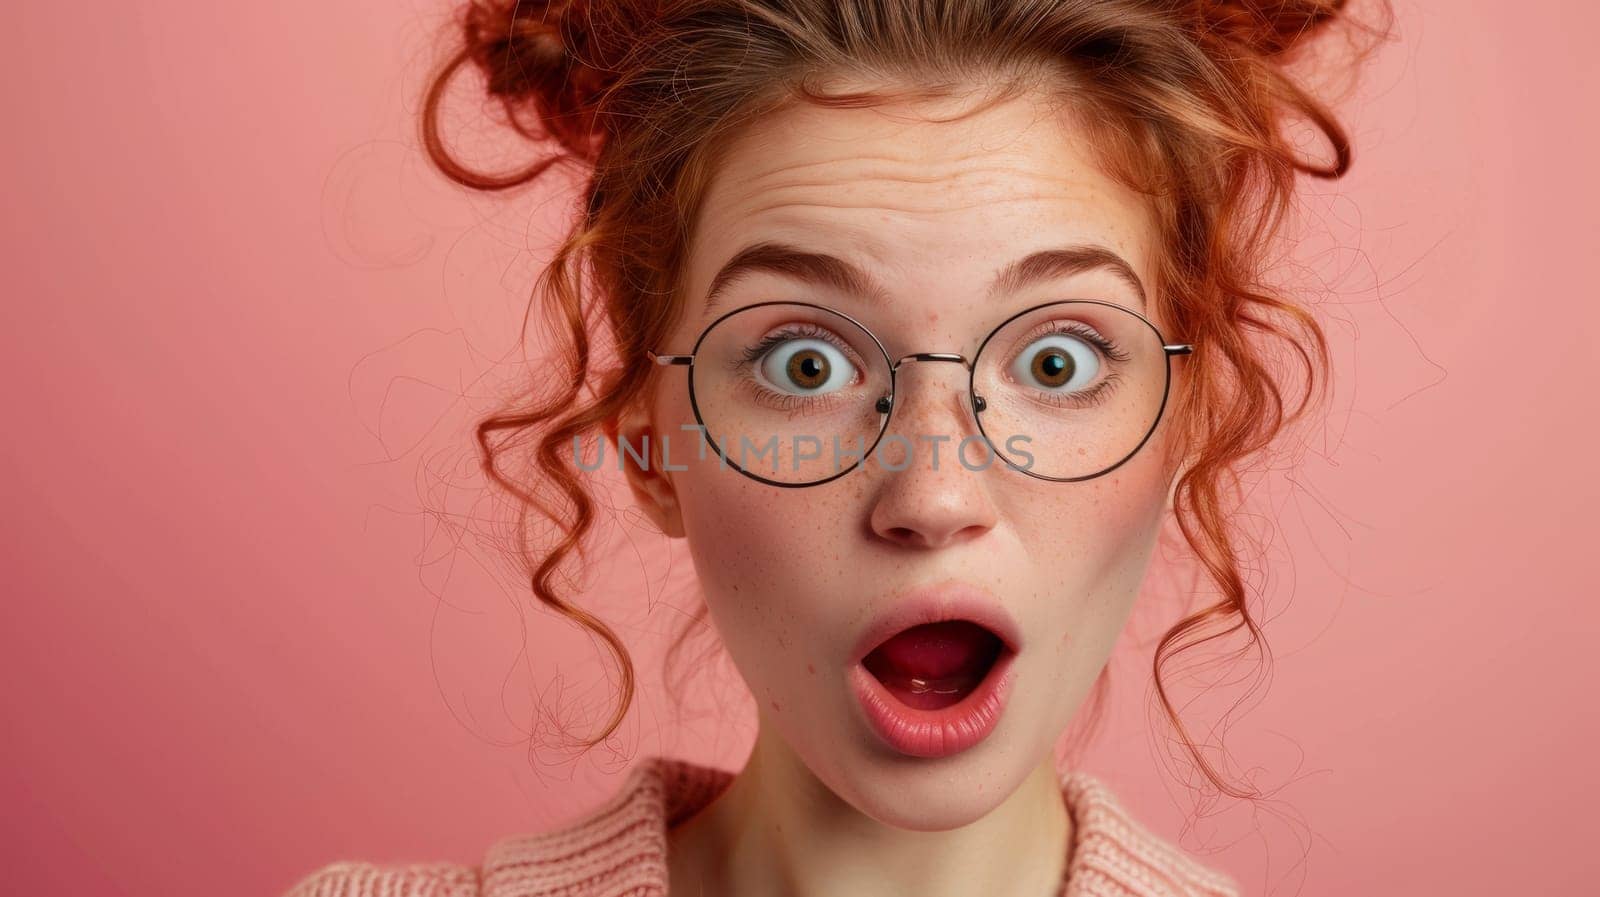 A woman with glasses and red hair making a surprised face, AI by starush